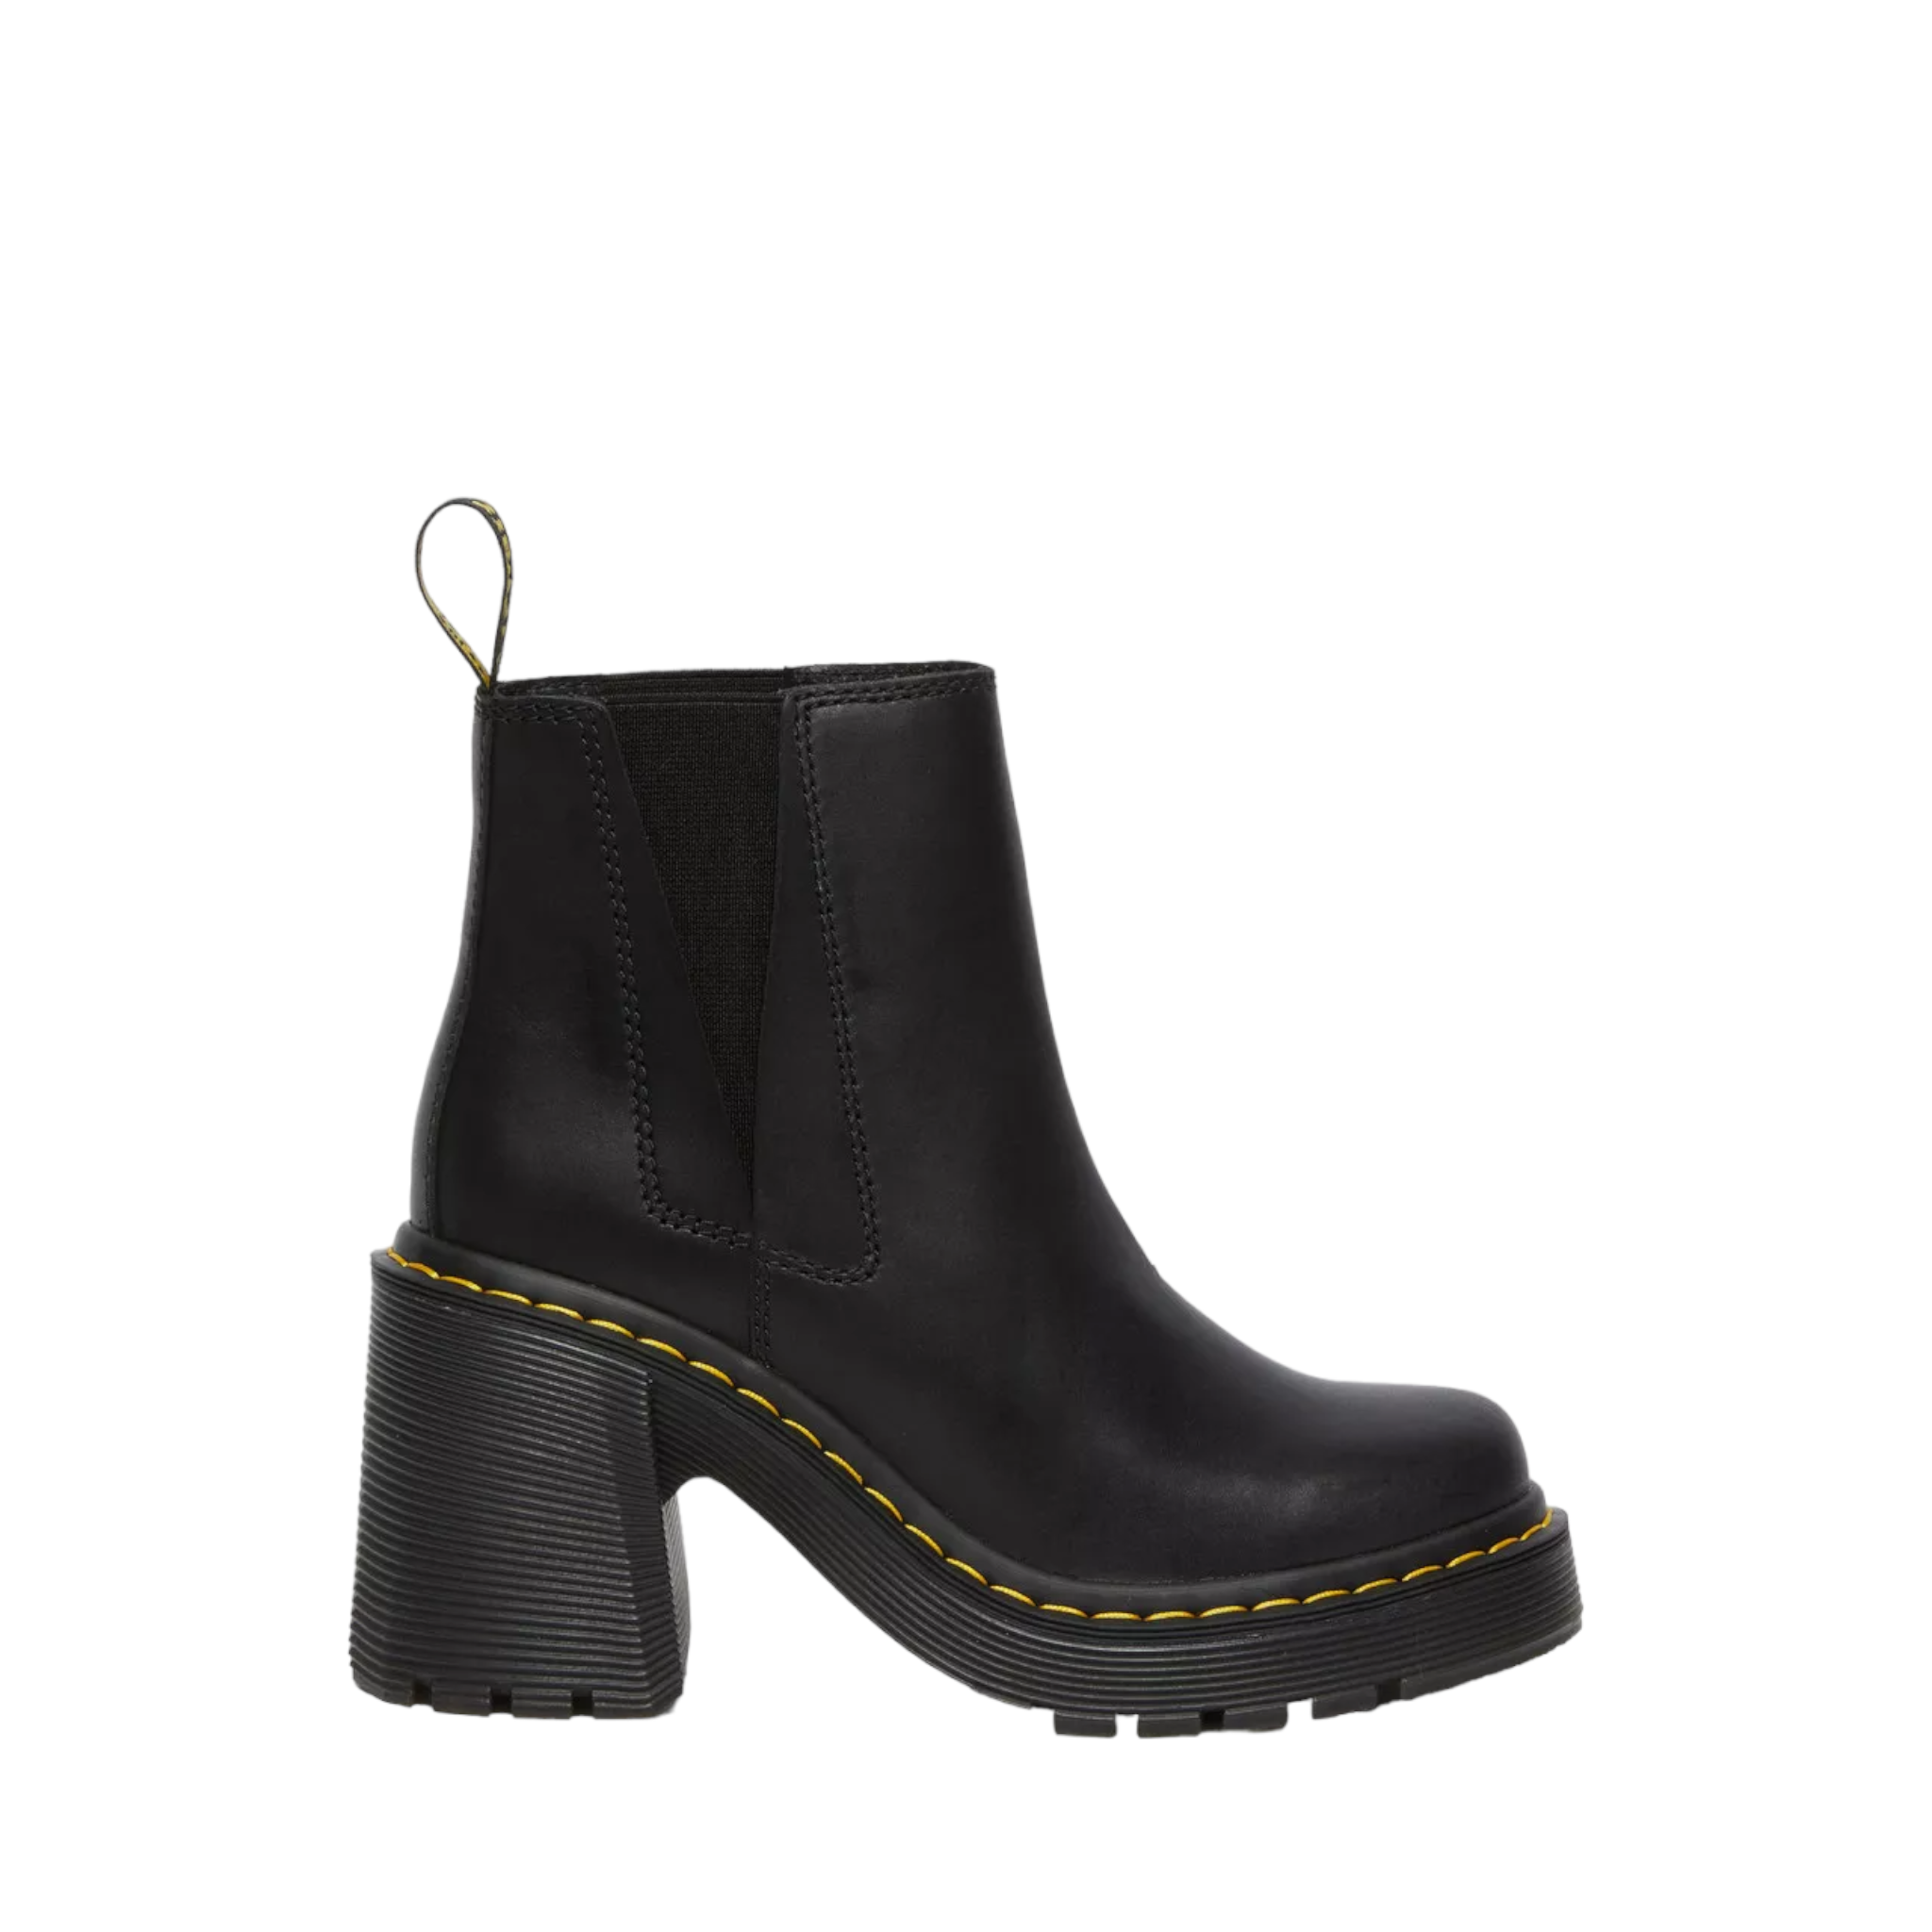 Spence - shoe&amp;me - Dr. Martens - Boot - Boots, Winter, Womens